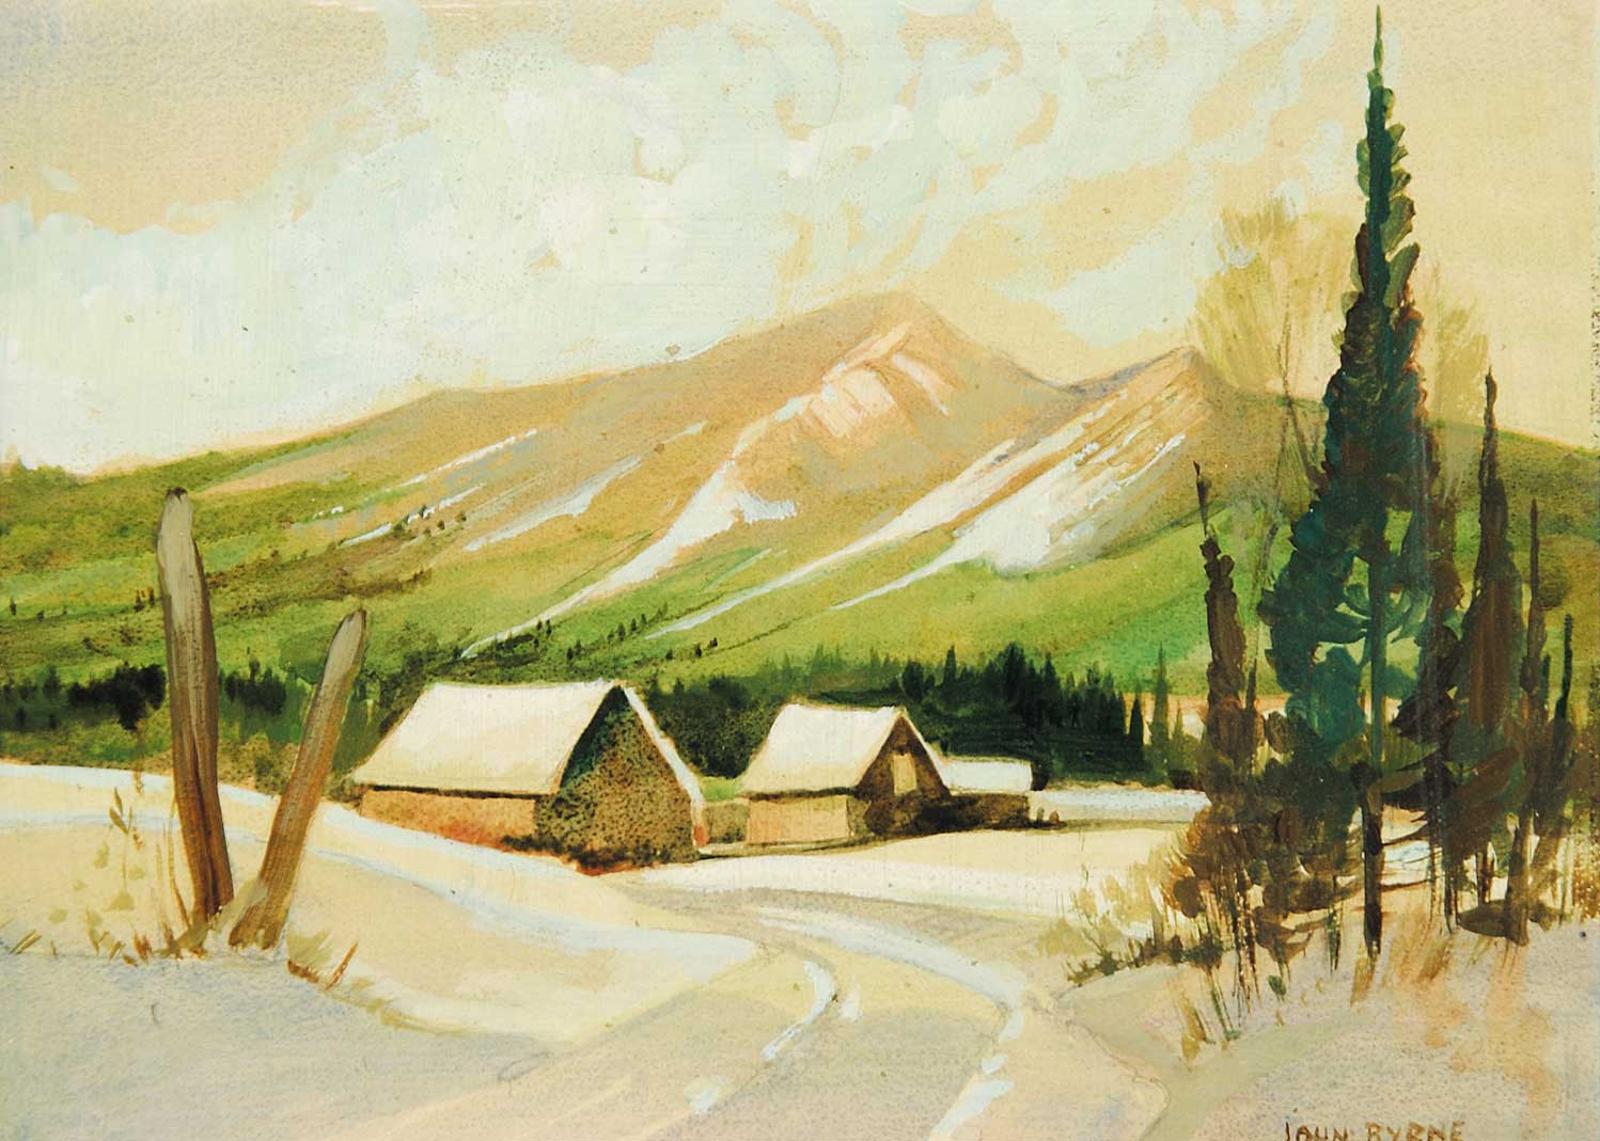 John L. Byrne (1906-1976) - Untitled - Springtime in the Mountains